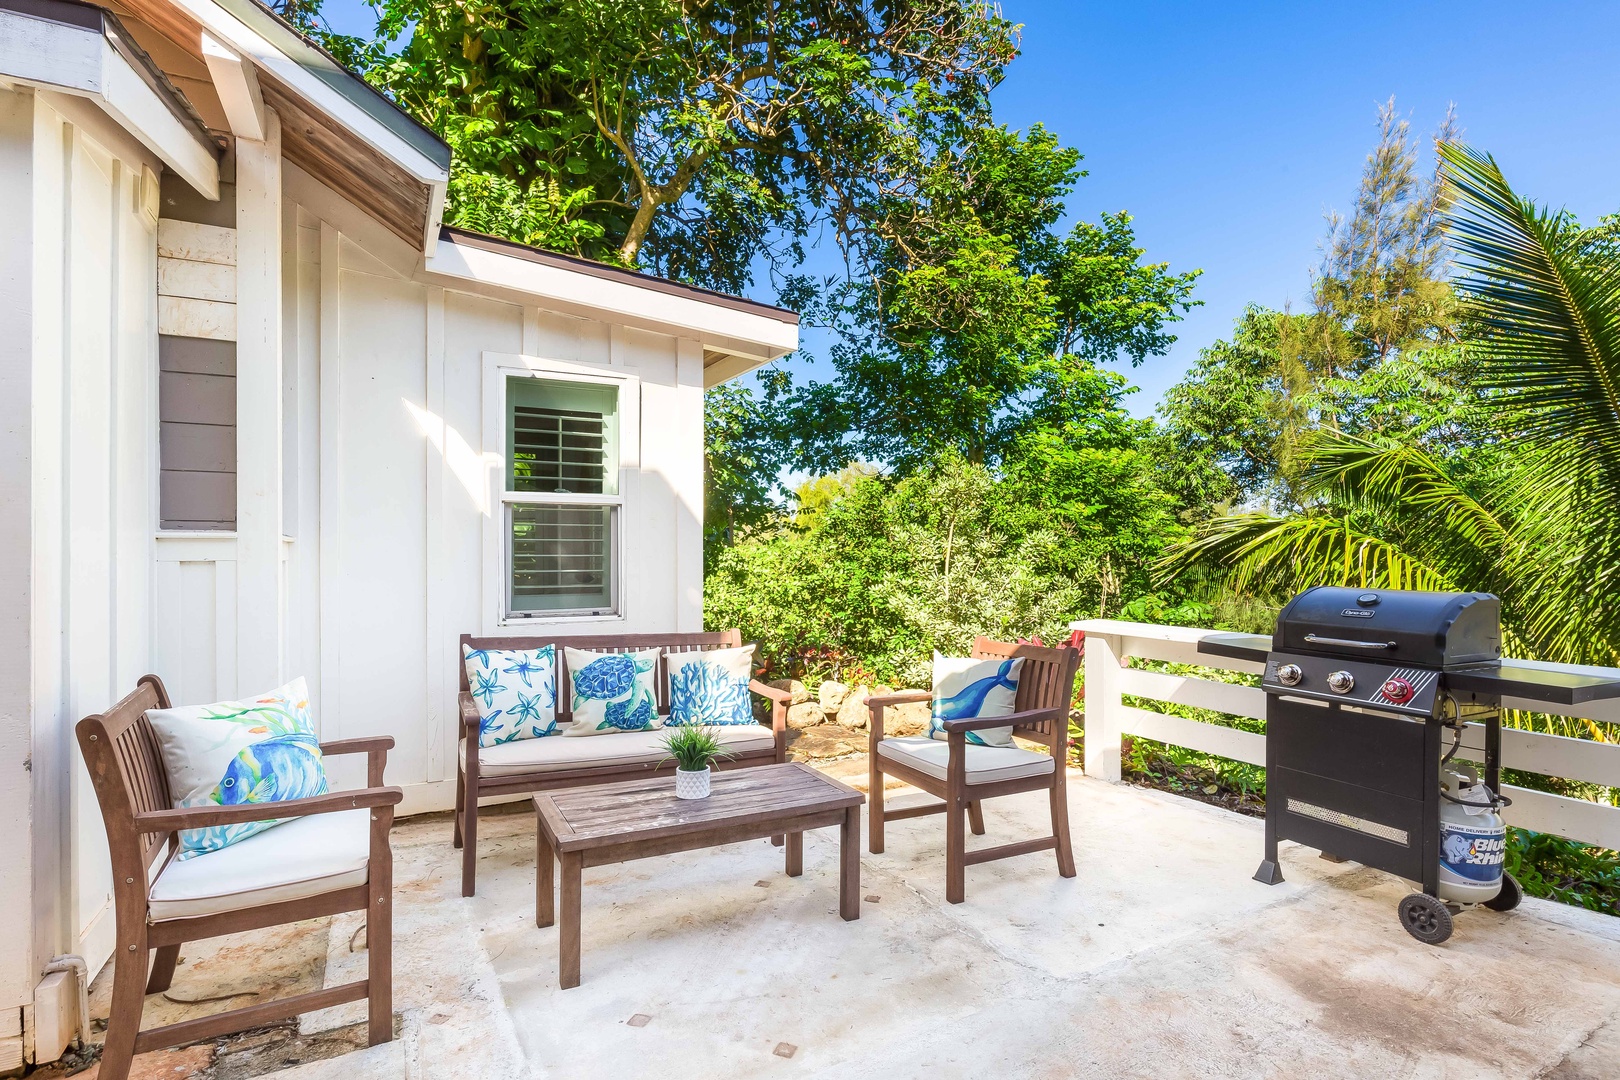 Haleiwa Vacation Rentals, Mele Makana - Barbecue area nestled between the house and cottage